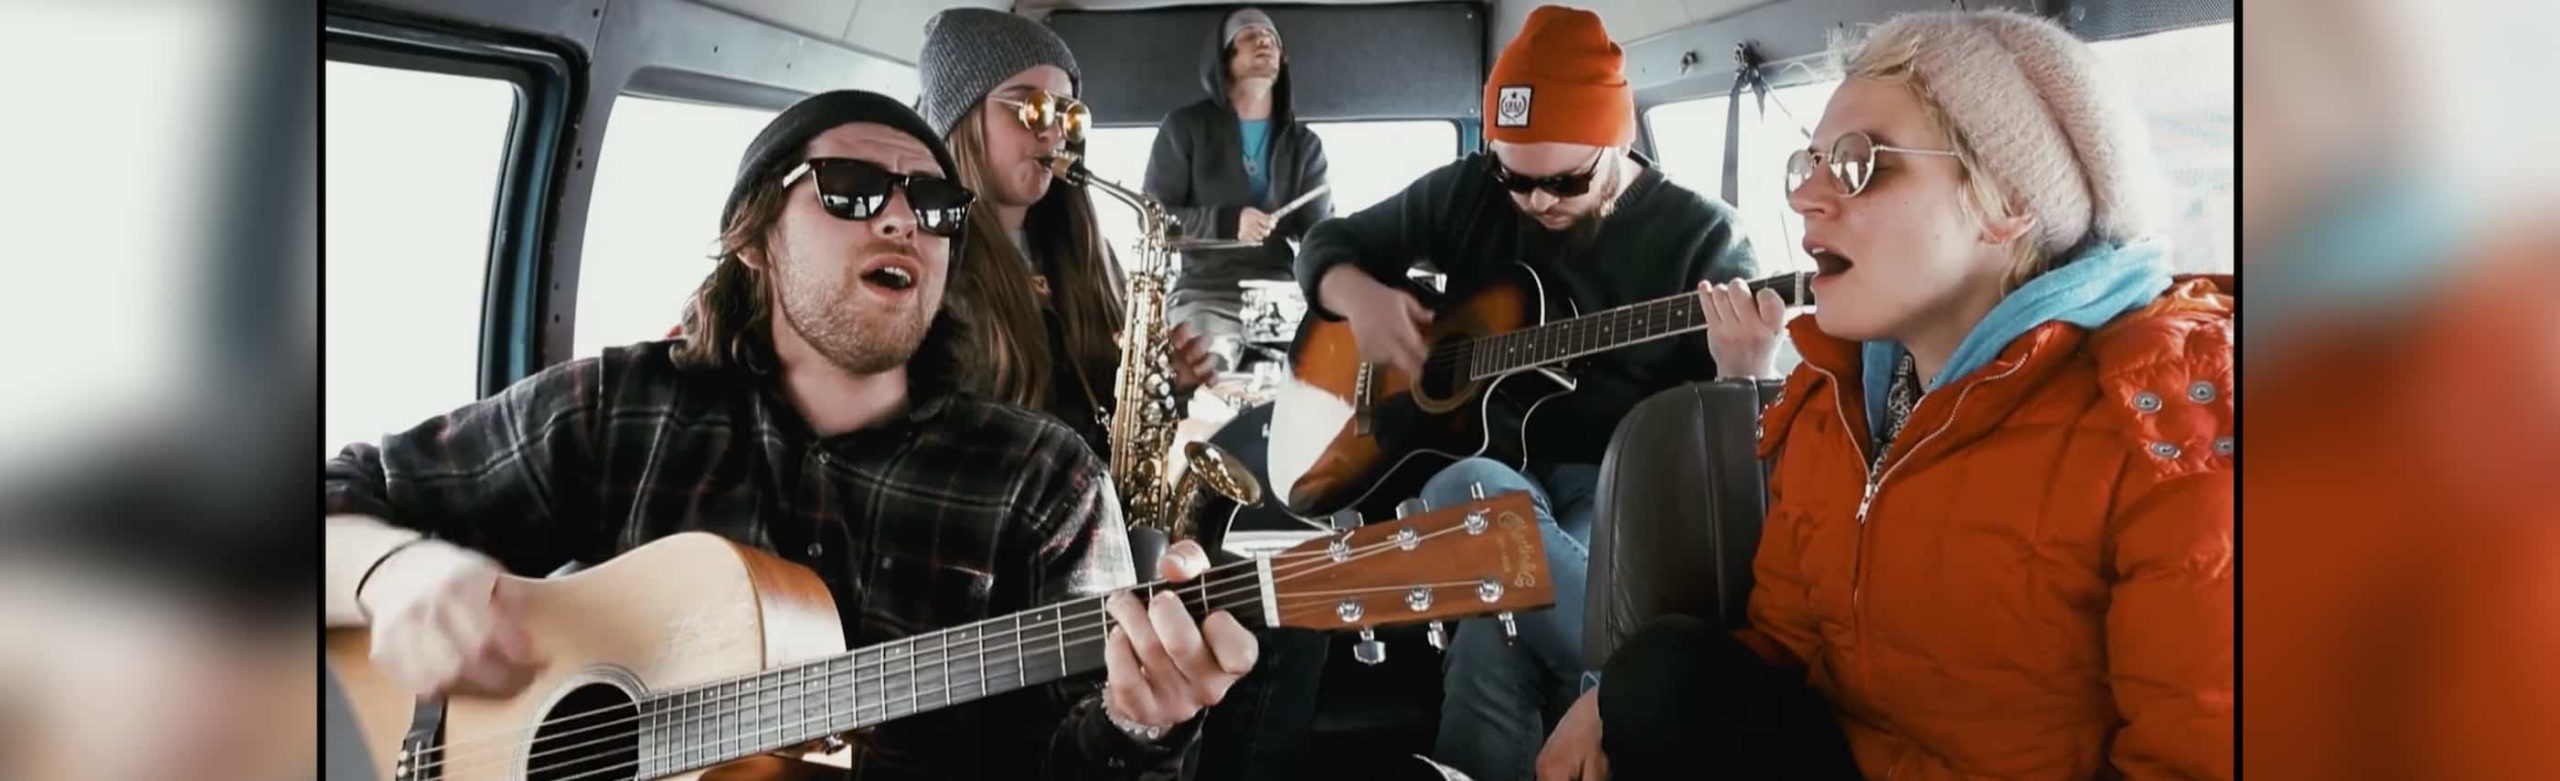 Letter B Drops First Video for ‘Jean Claude Van Jam’ Sessions and Announces Missoula Concert Image